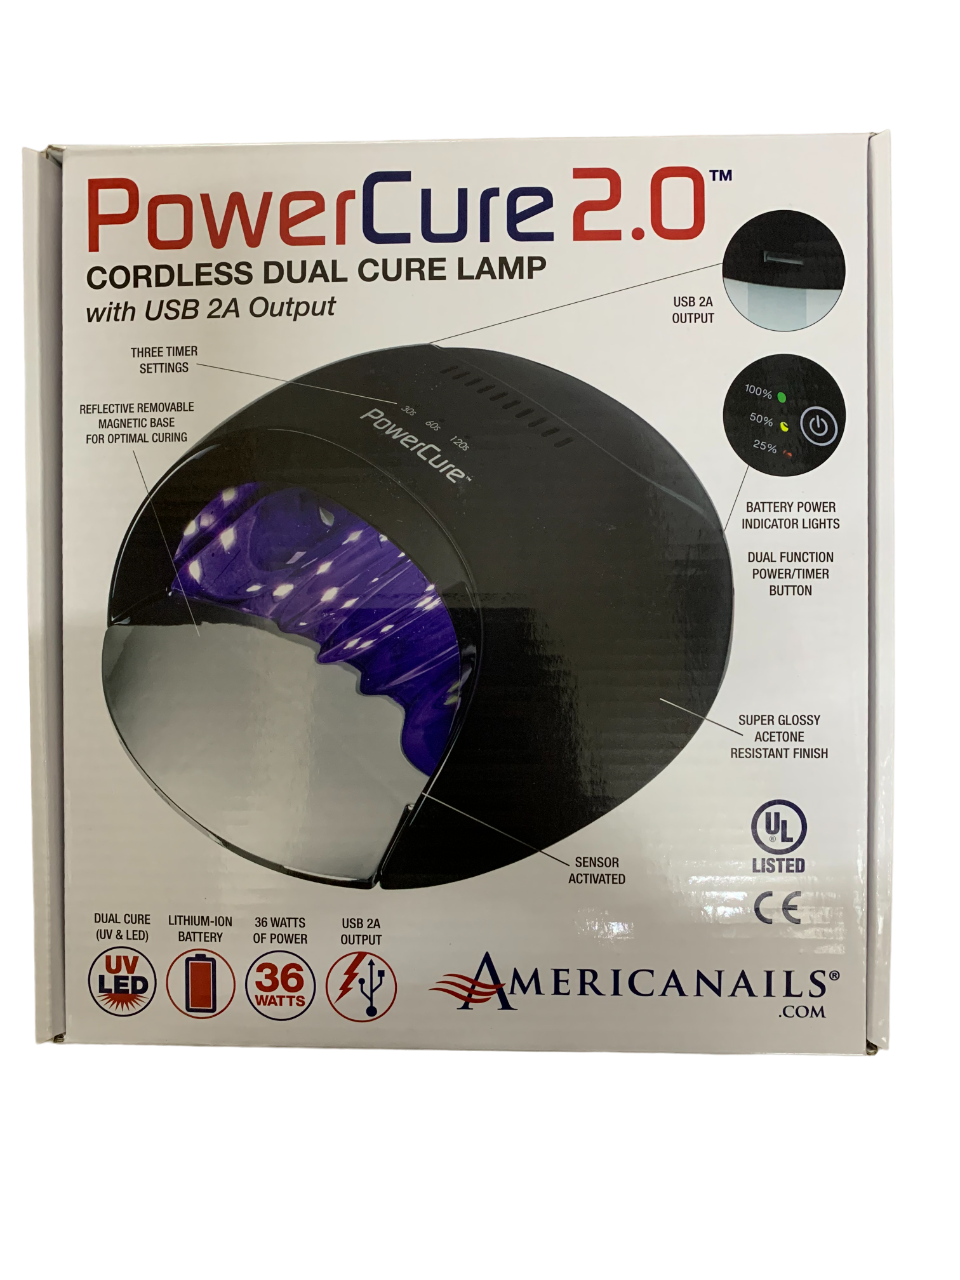 Power Cure 2.0 Cordless Dual Cure Lamp with USB 2A Output